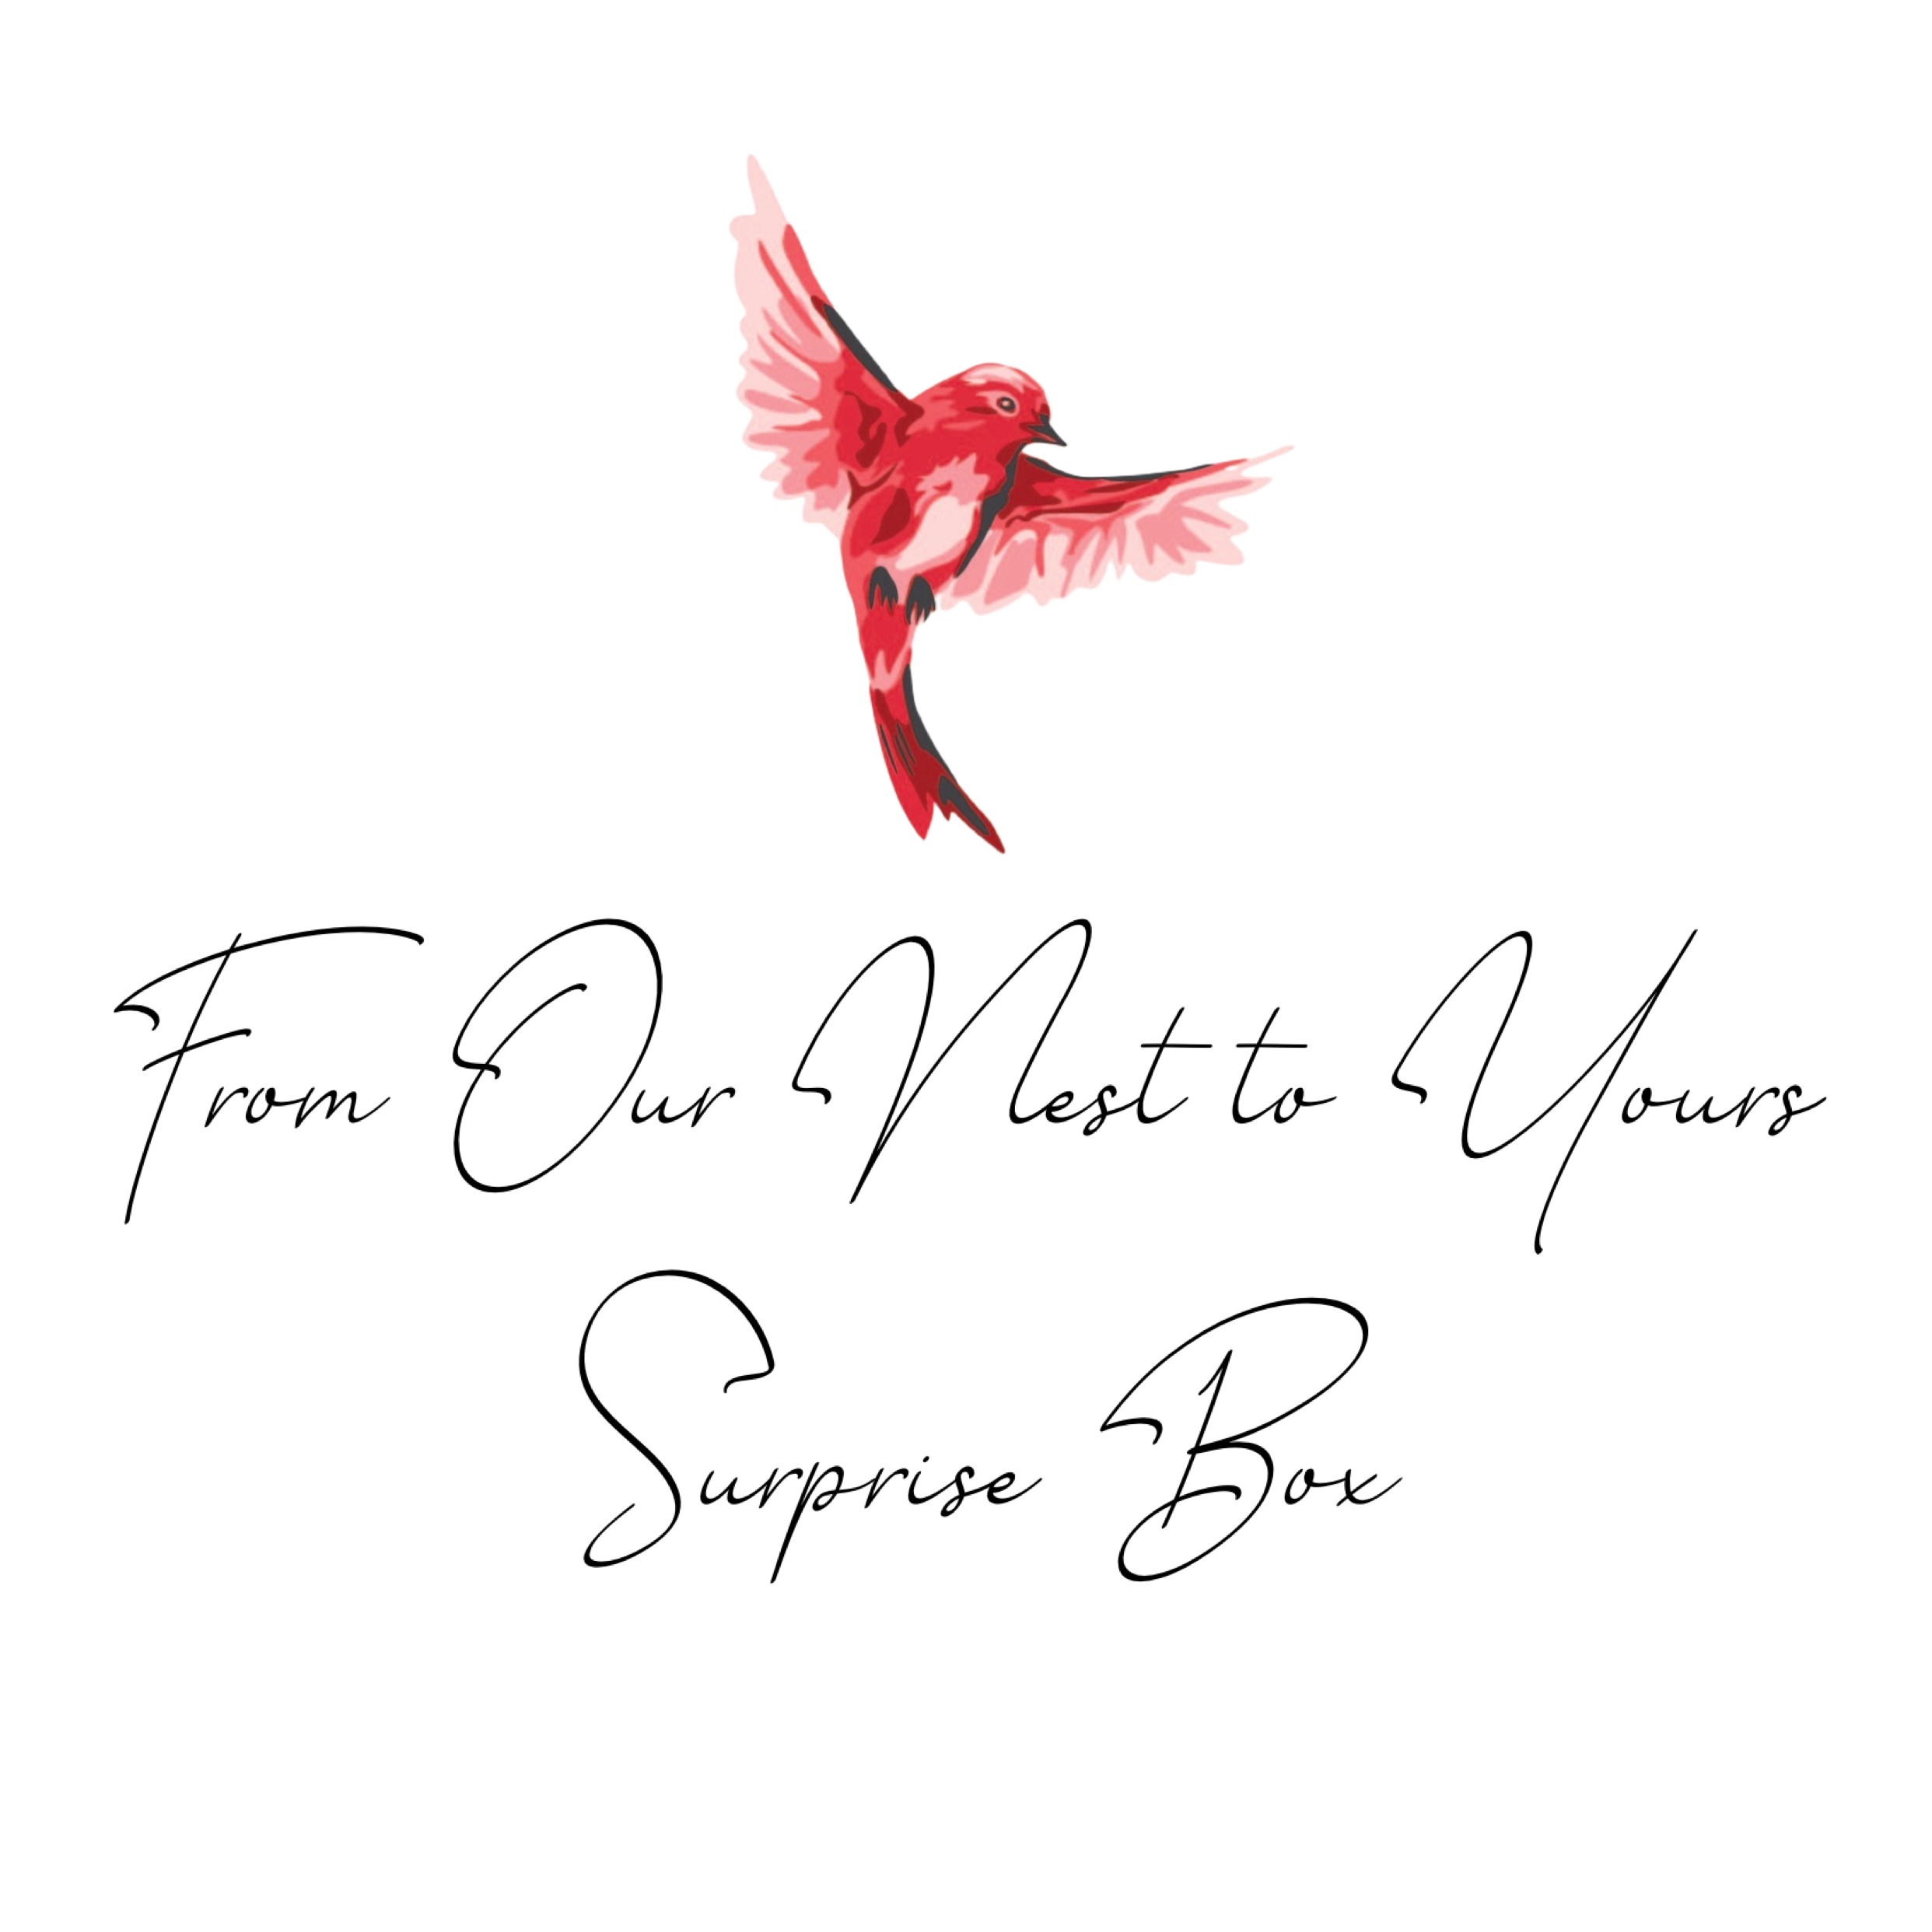 "From Our Nest to Yours" $50 Surprise Box